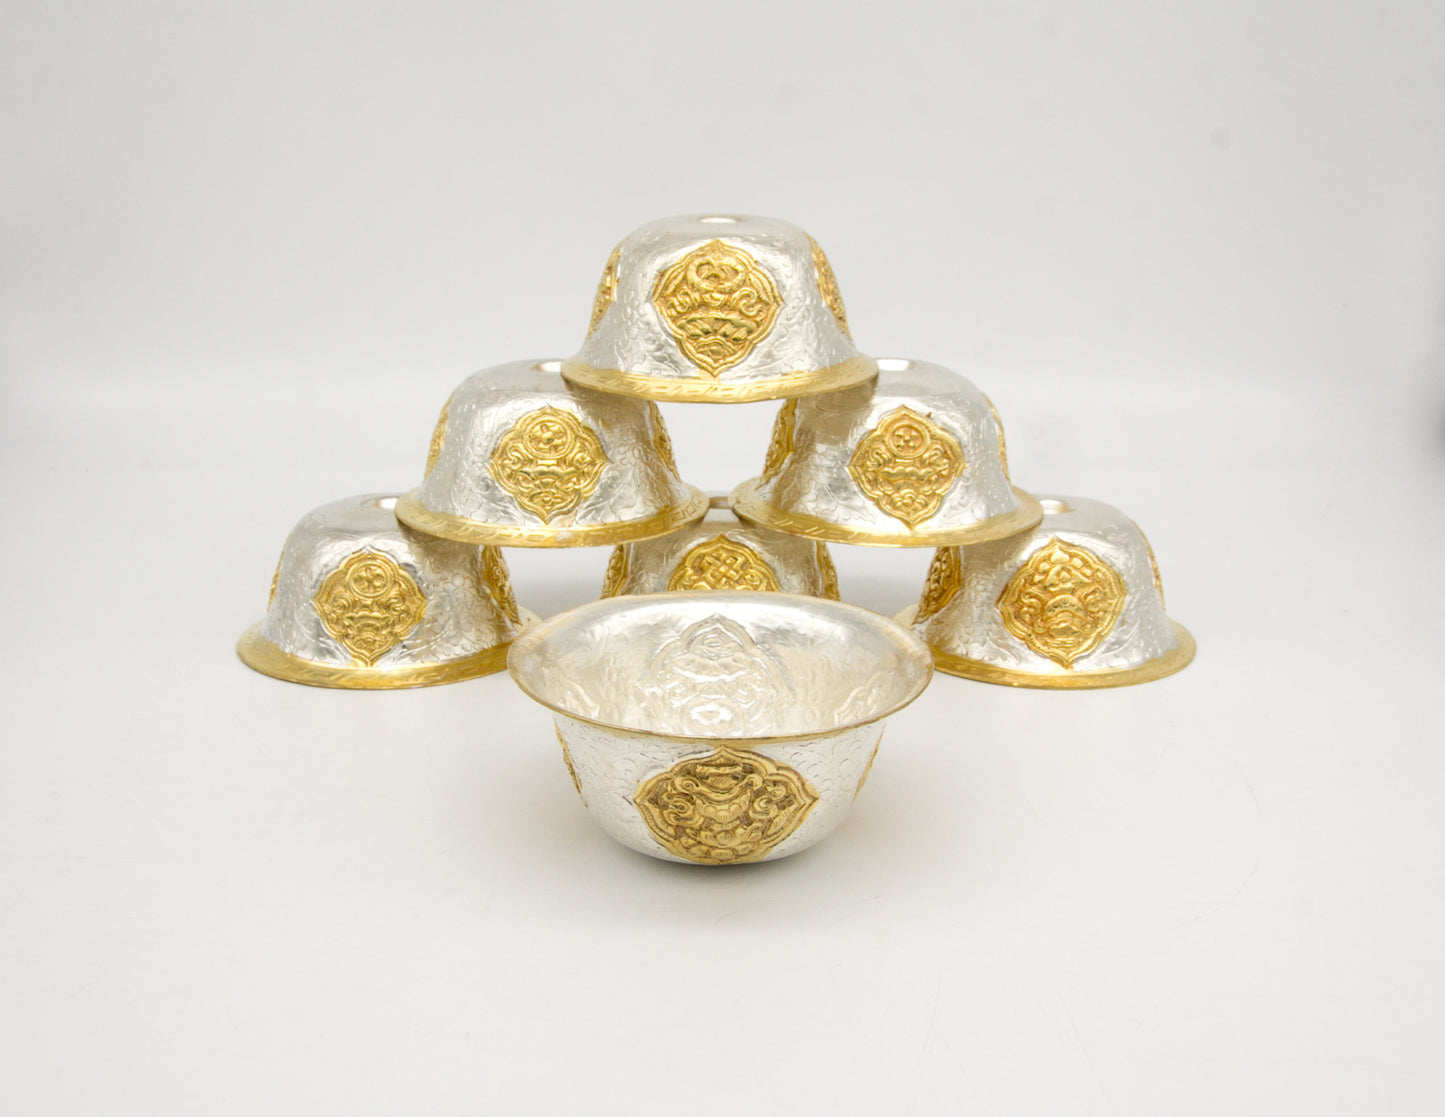 Handcrafted Embossed Offering Bowl Set, Silver & Gold-Plated – 8cm